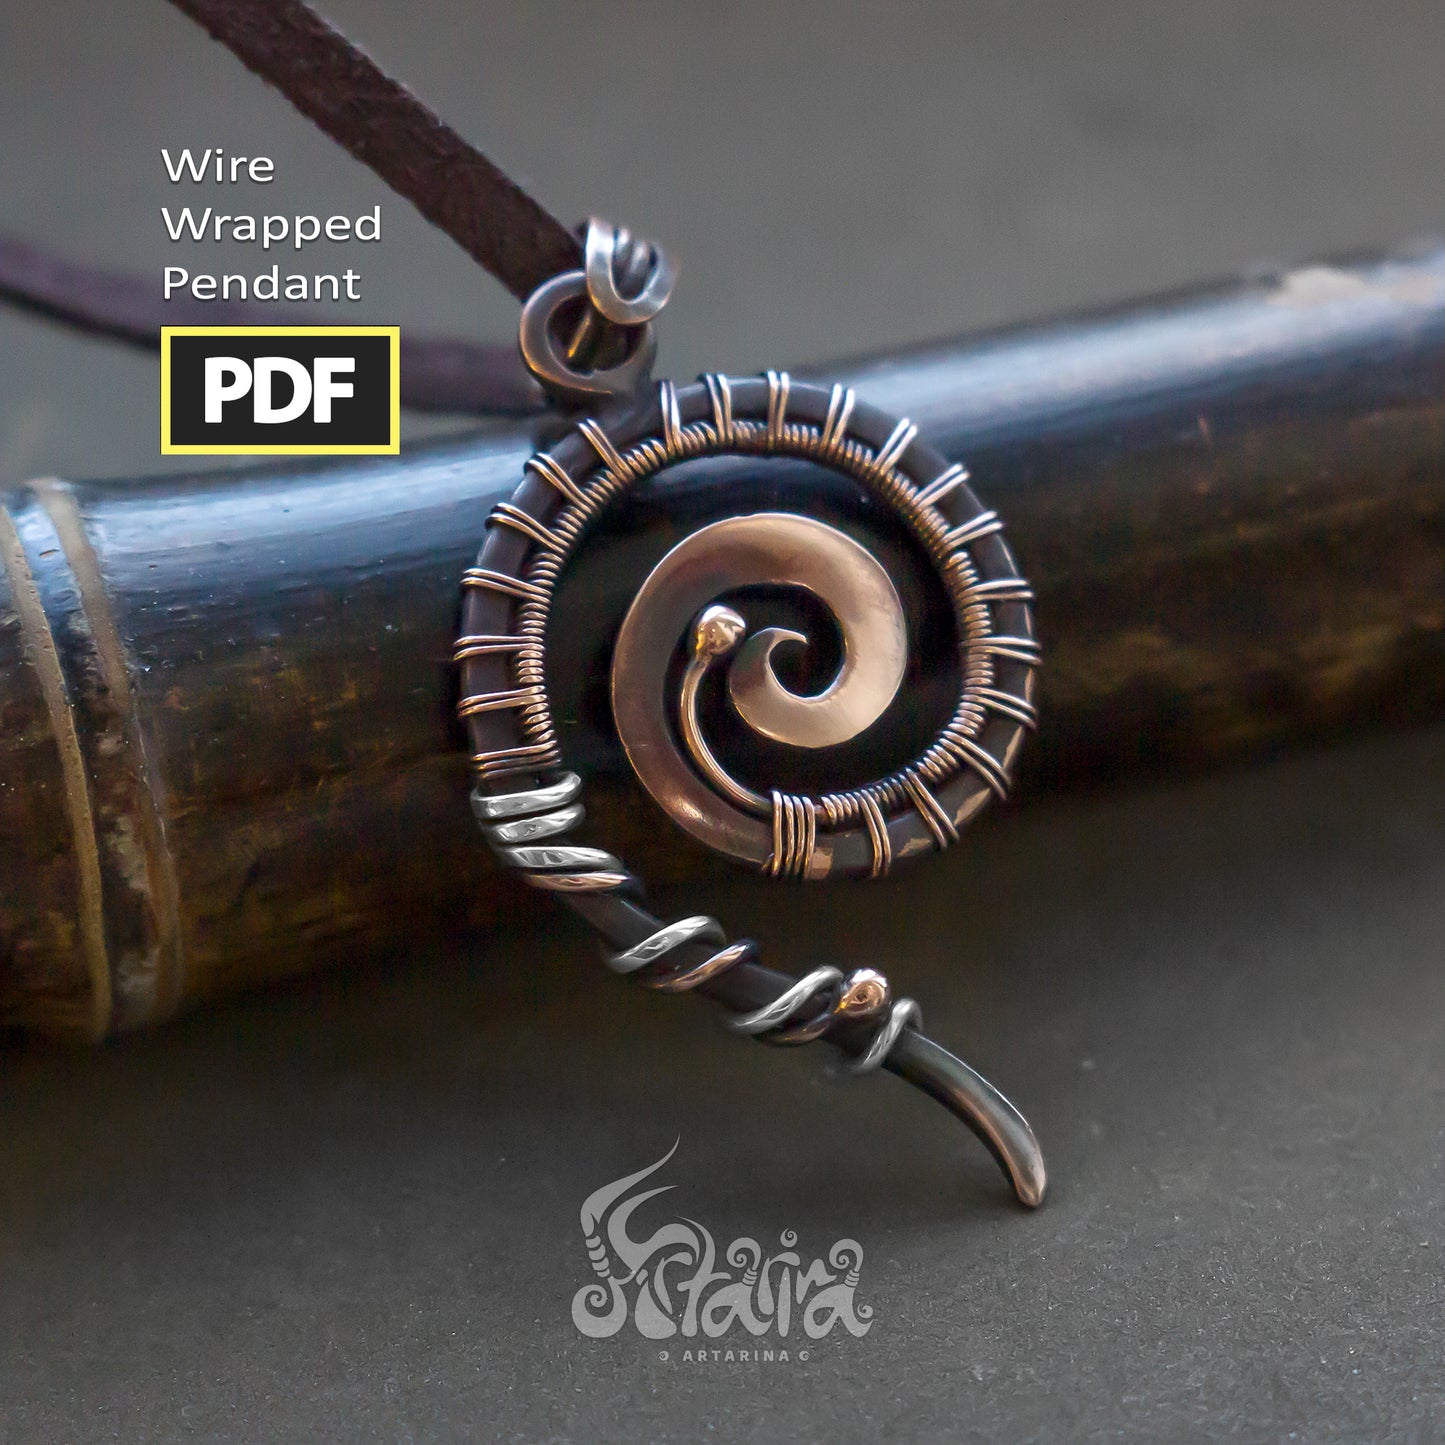 4 Simplest Wire Wrapping Tutorials for great beginner start! pic 4